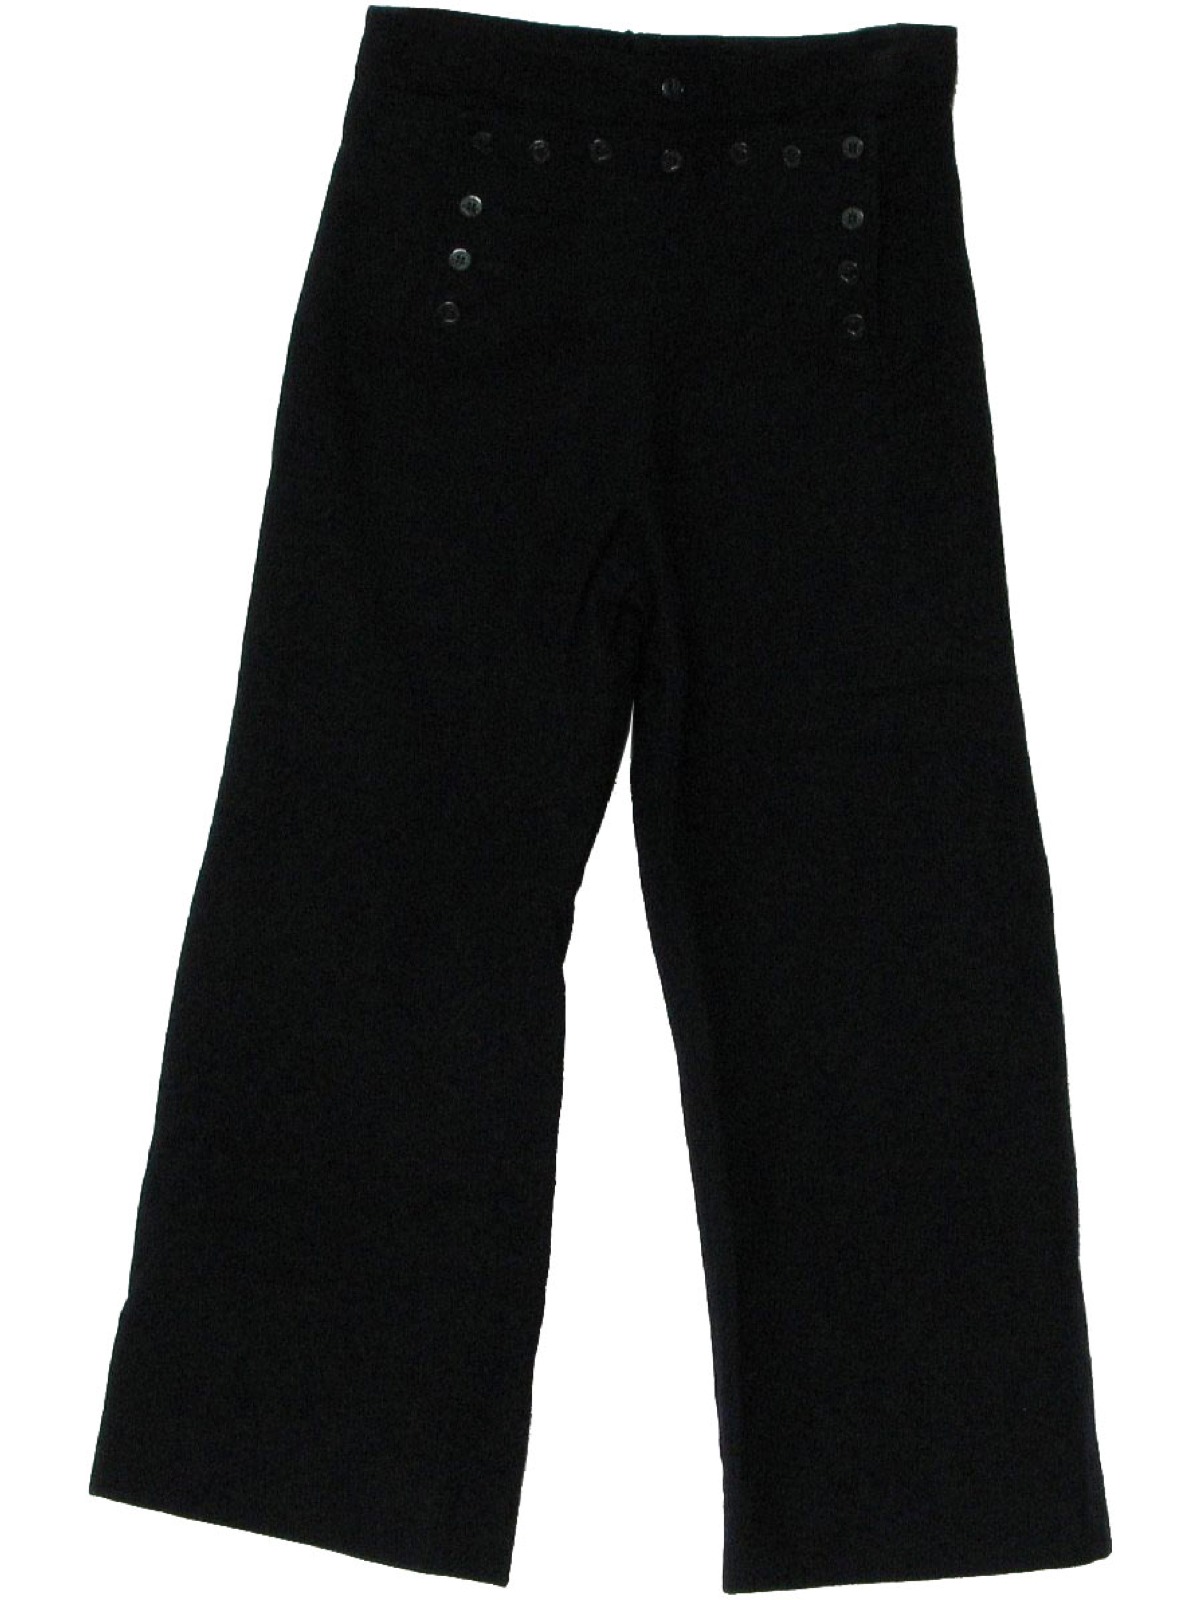 1960's Vintage Navy Issue Bellbottom Pants: 60s -Navy Issue- Mens ...